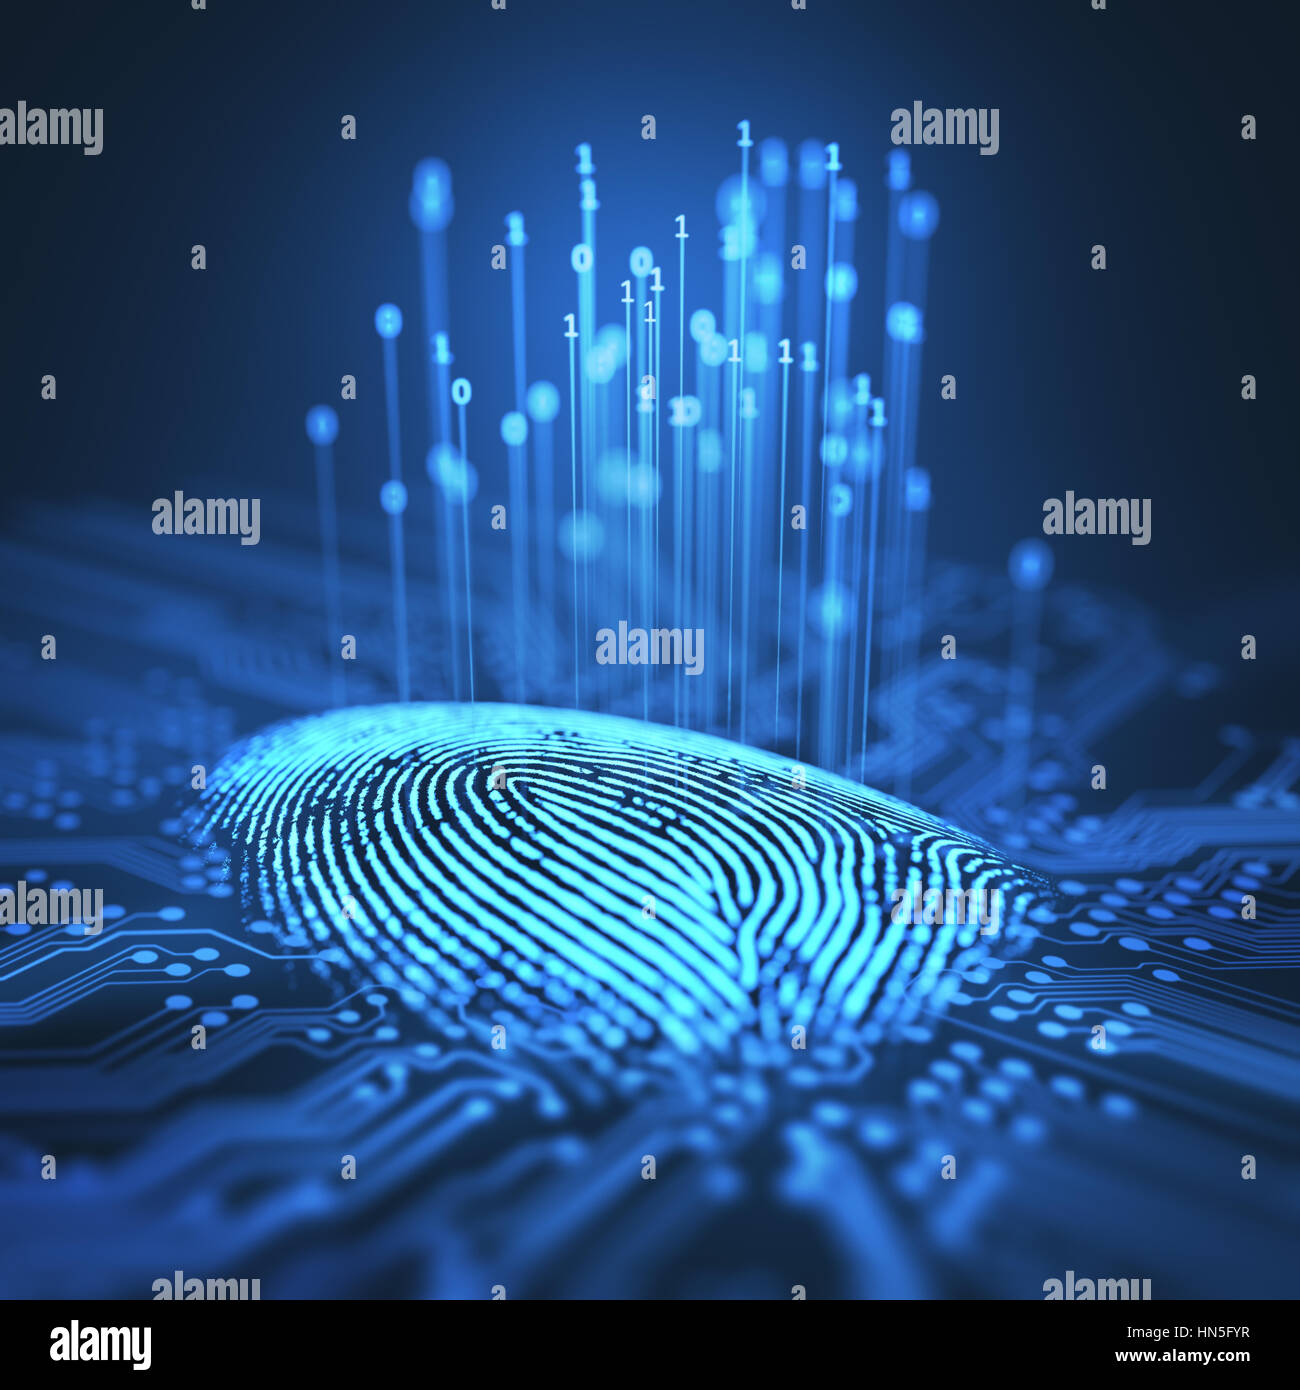 3D illustration. Fingerprint integrated in a printed circuit, releasing binary codes. Stock Photo